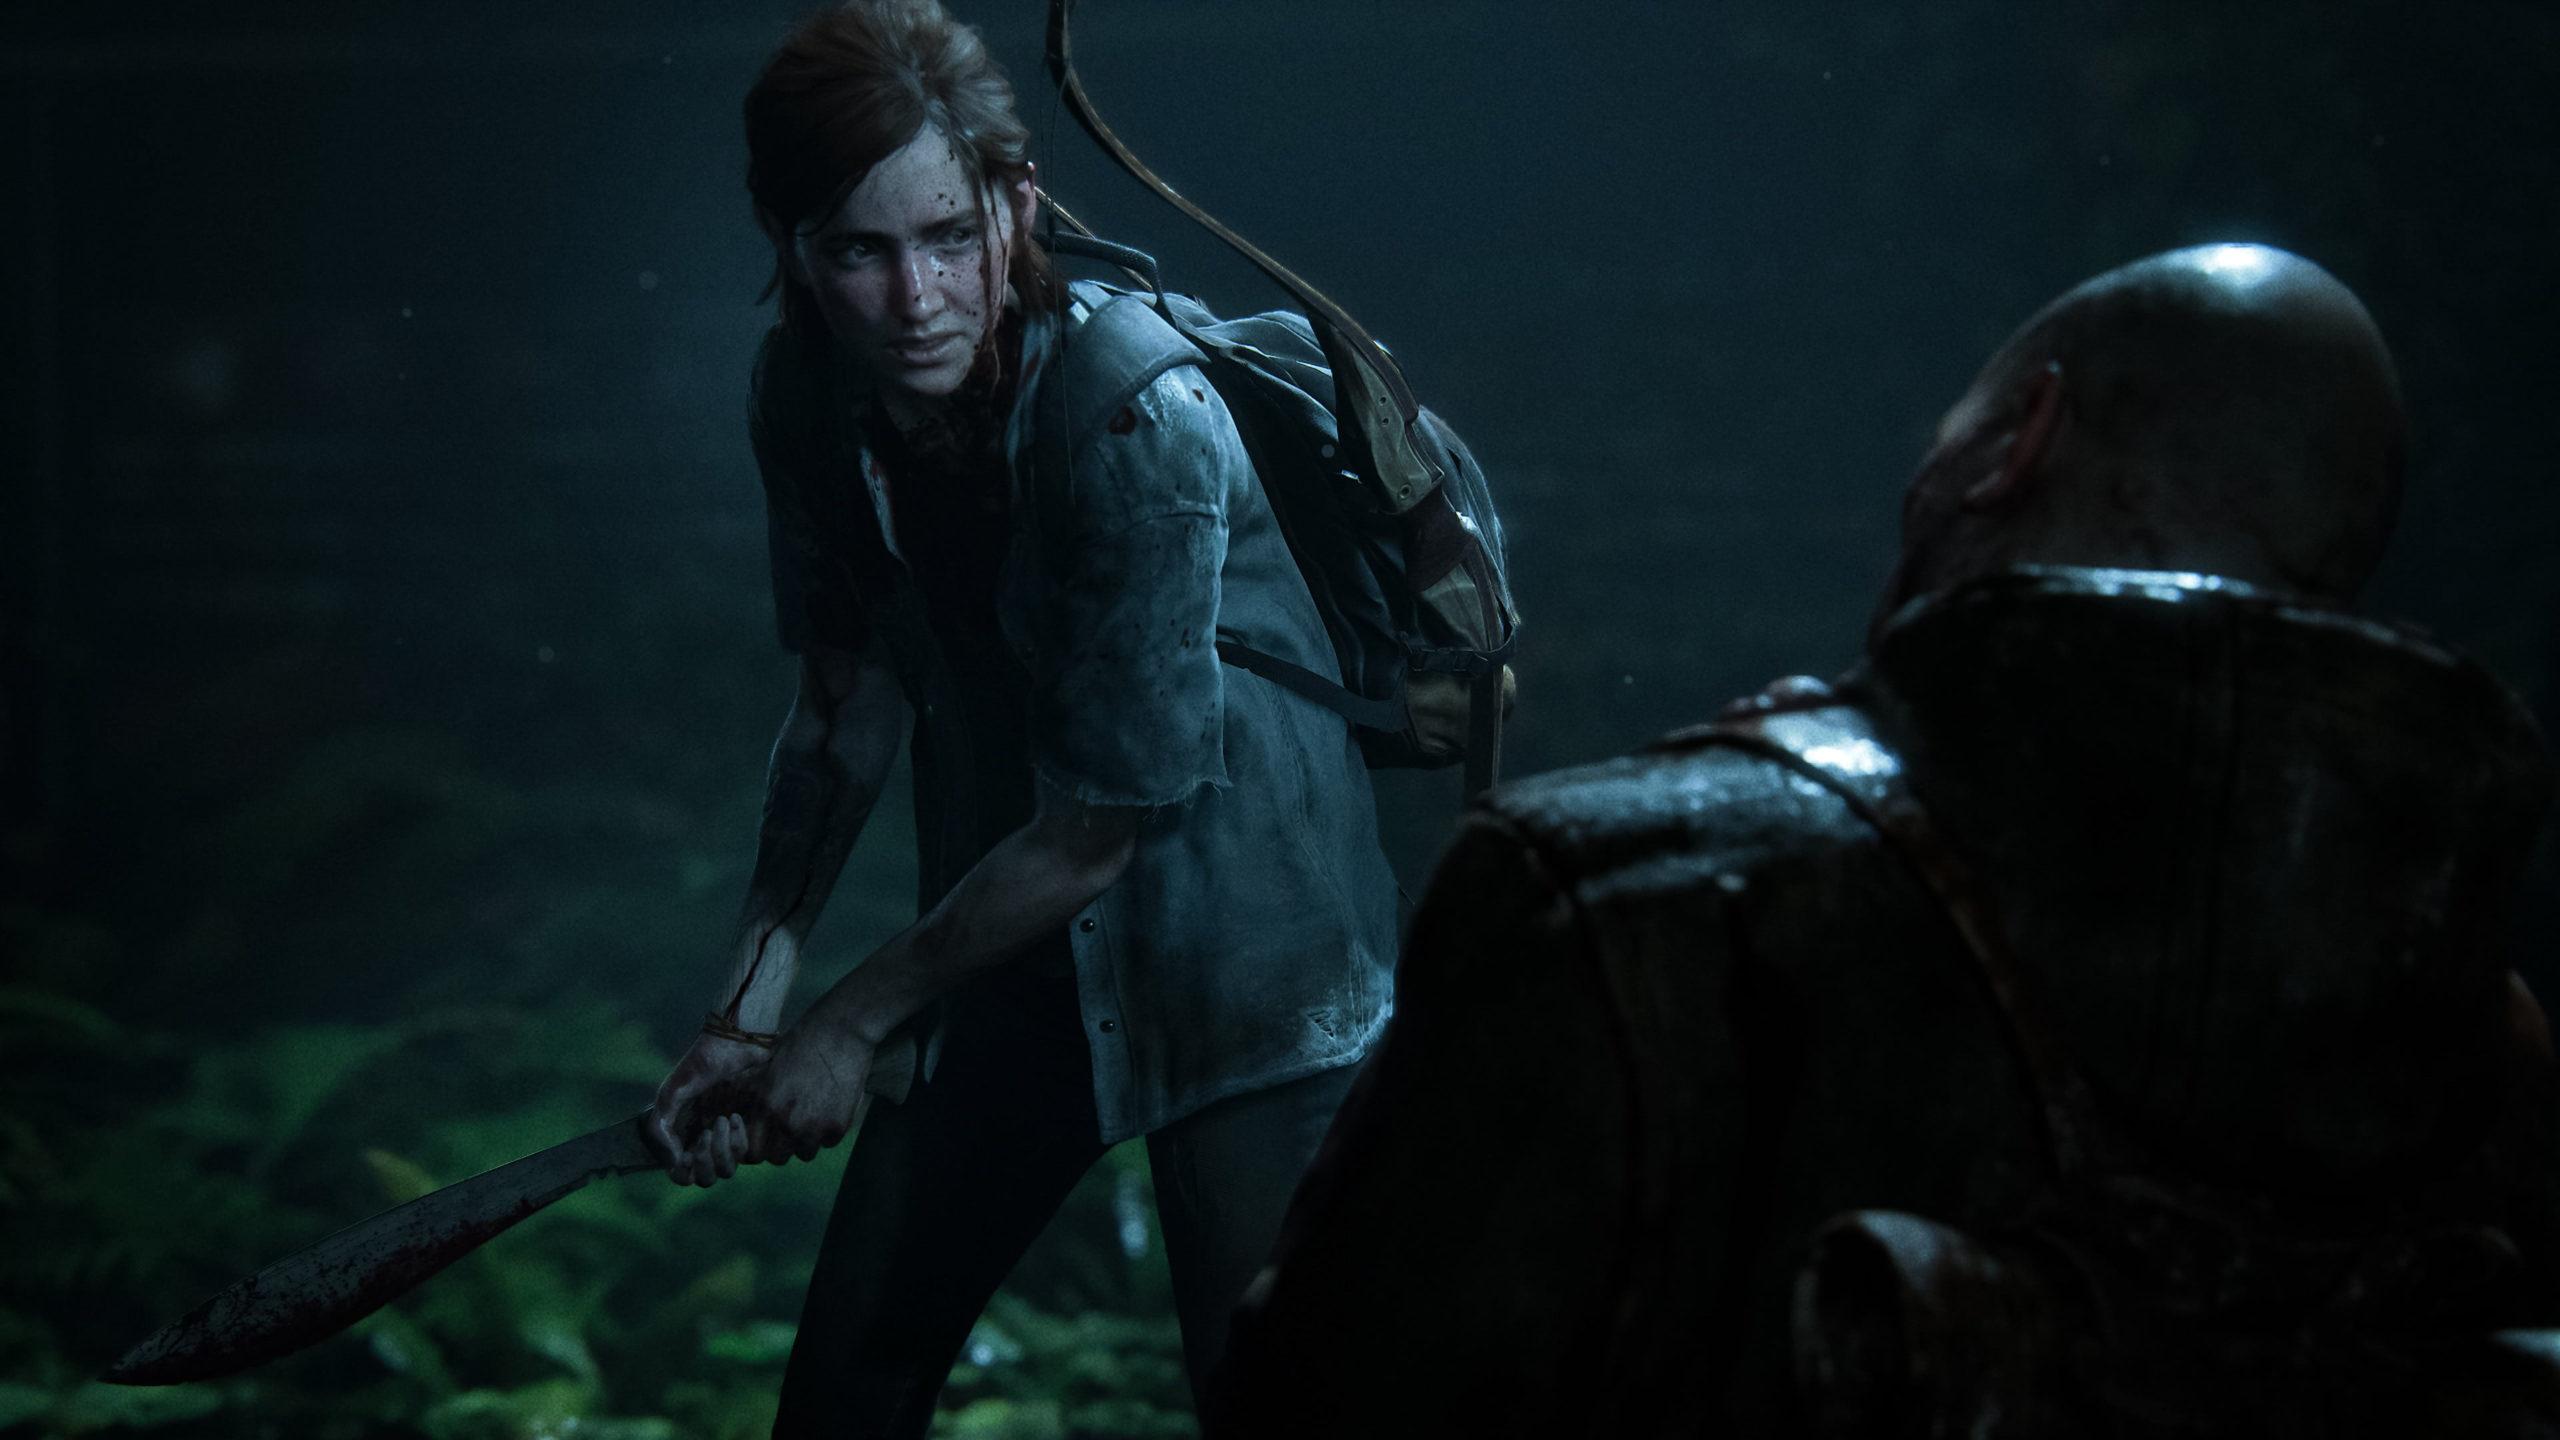 Ellie in TLOU Part II (Source: Naughty Dog/PlayStation/Reproduction)